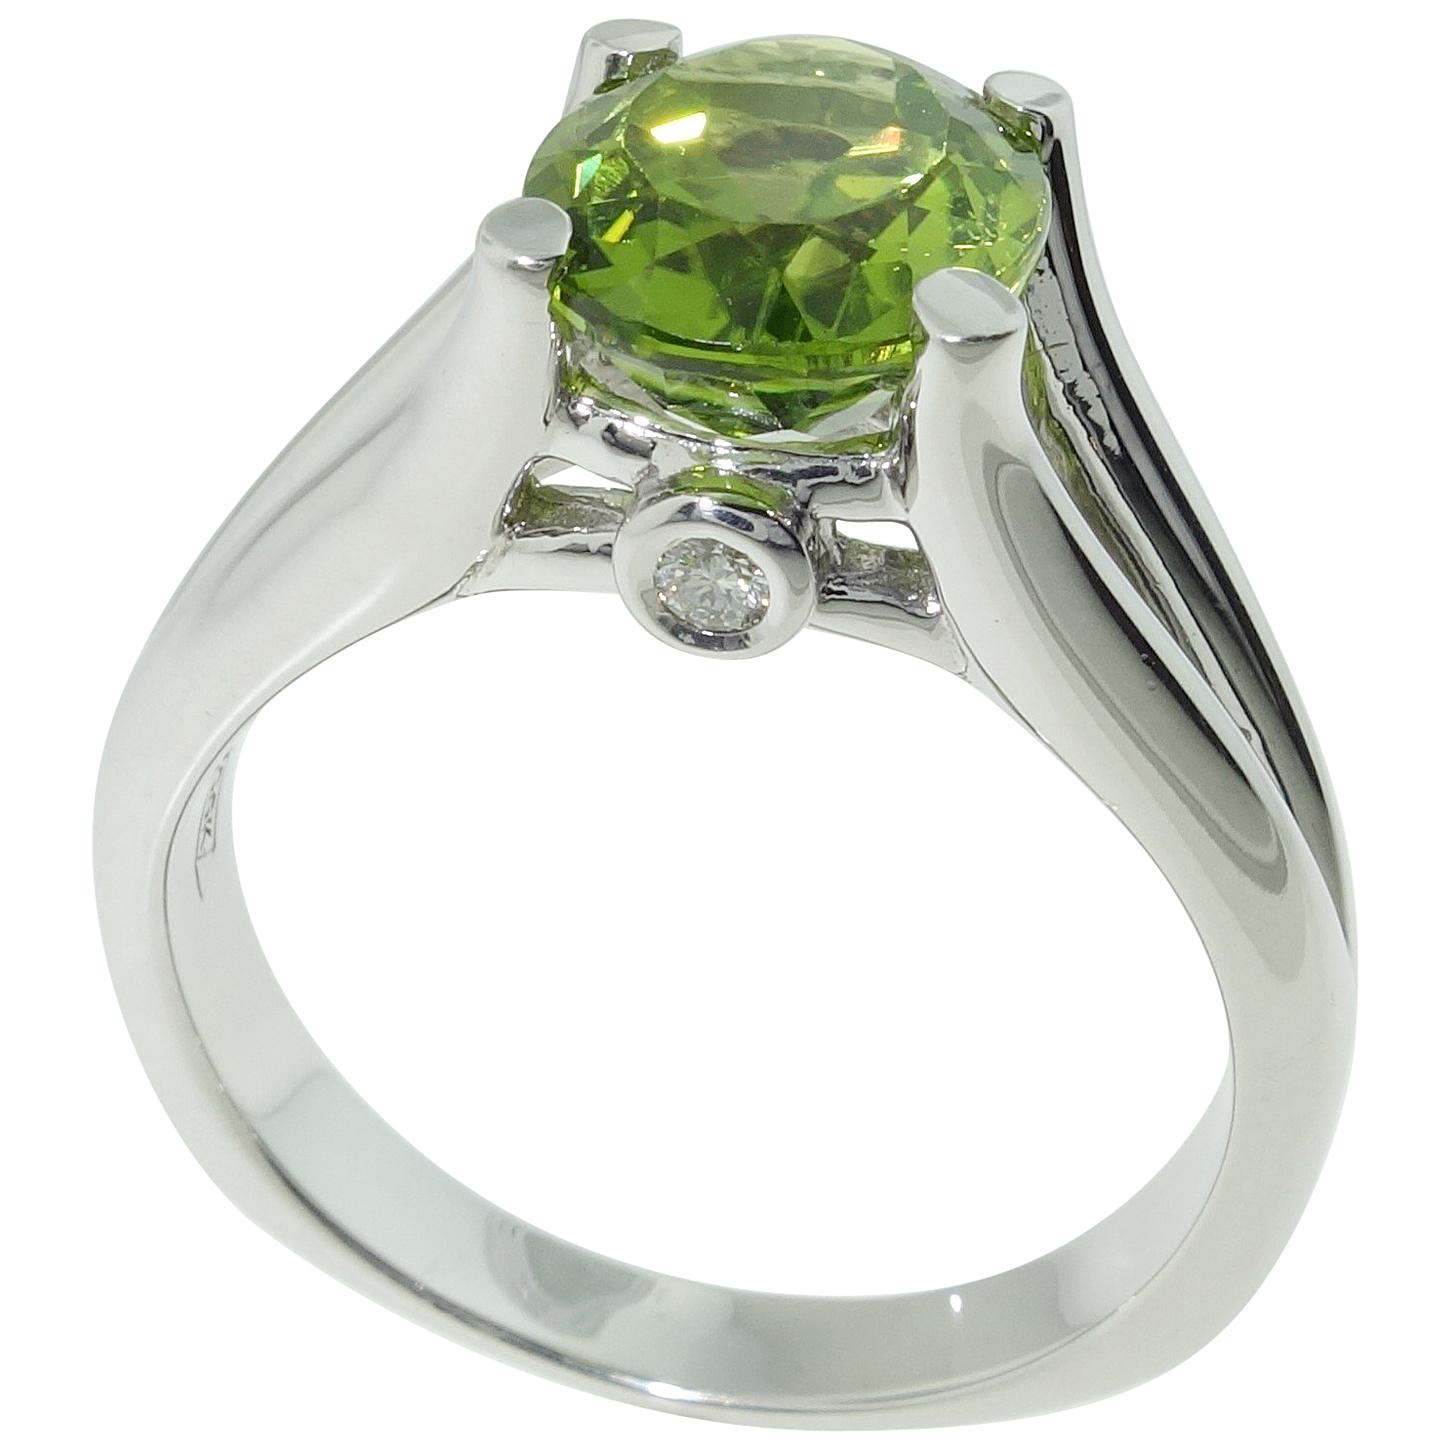 3.01 Carat Peridot and Diamond Solitaire Ring